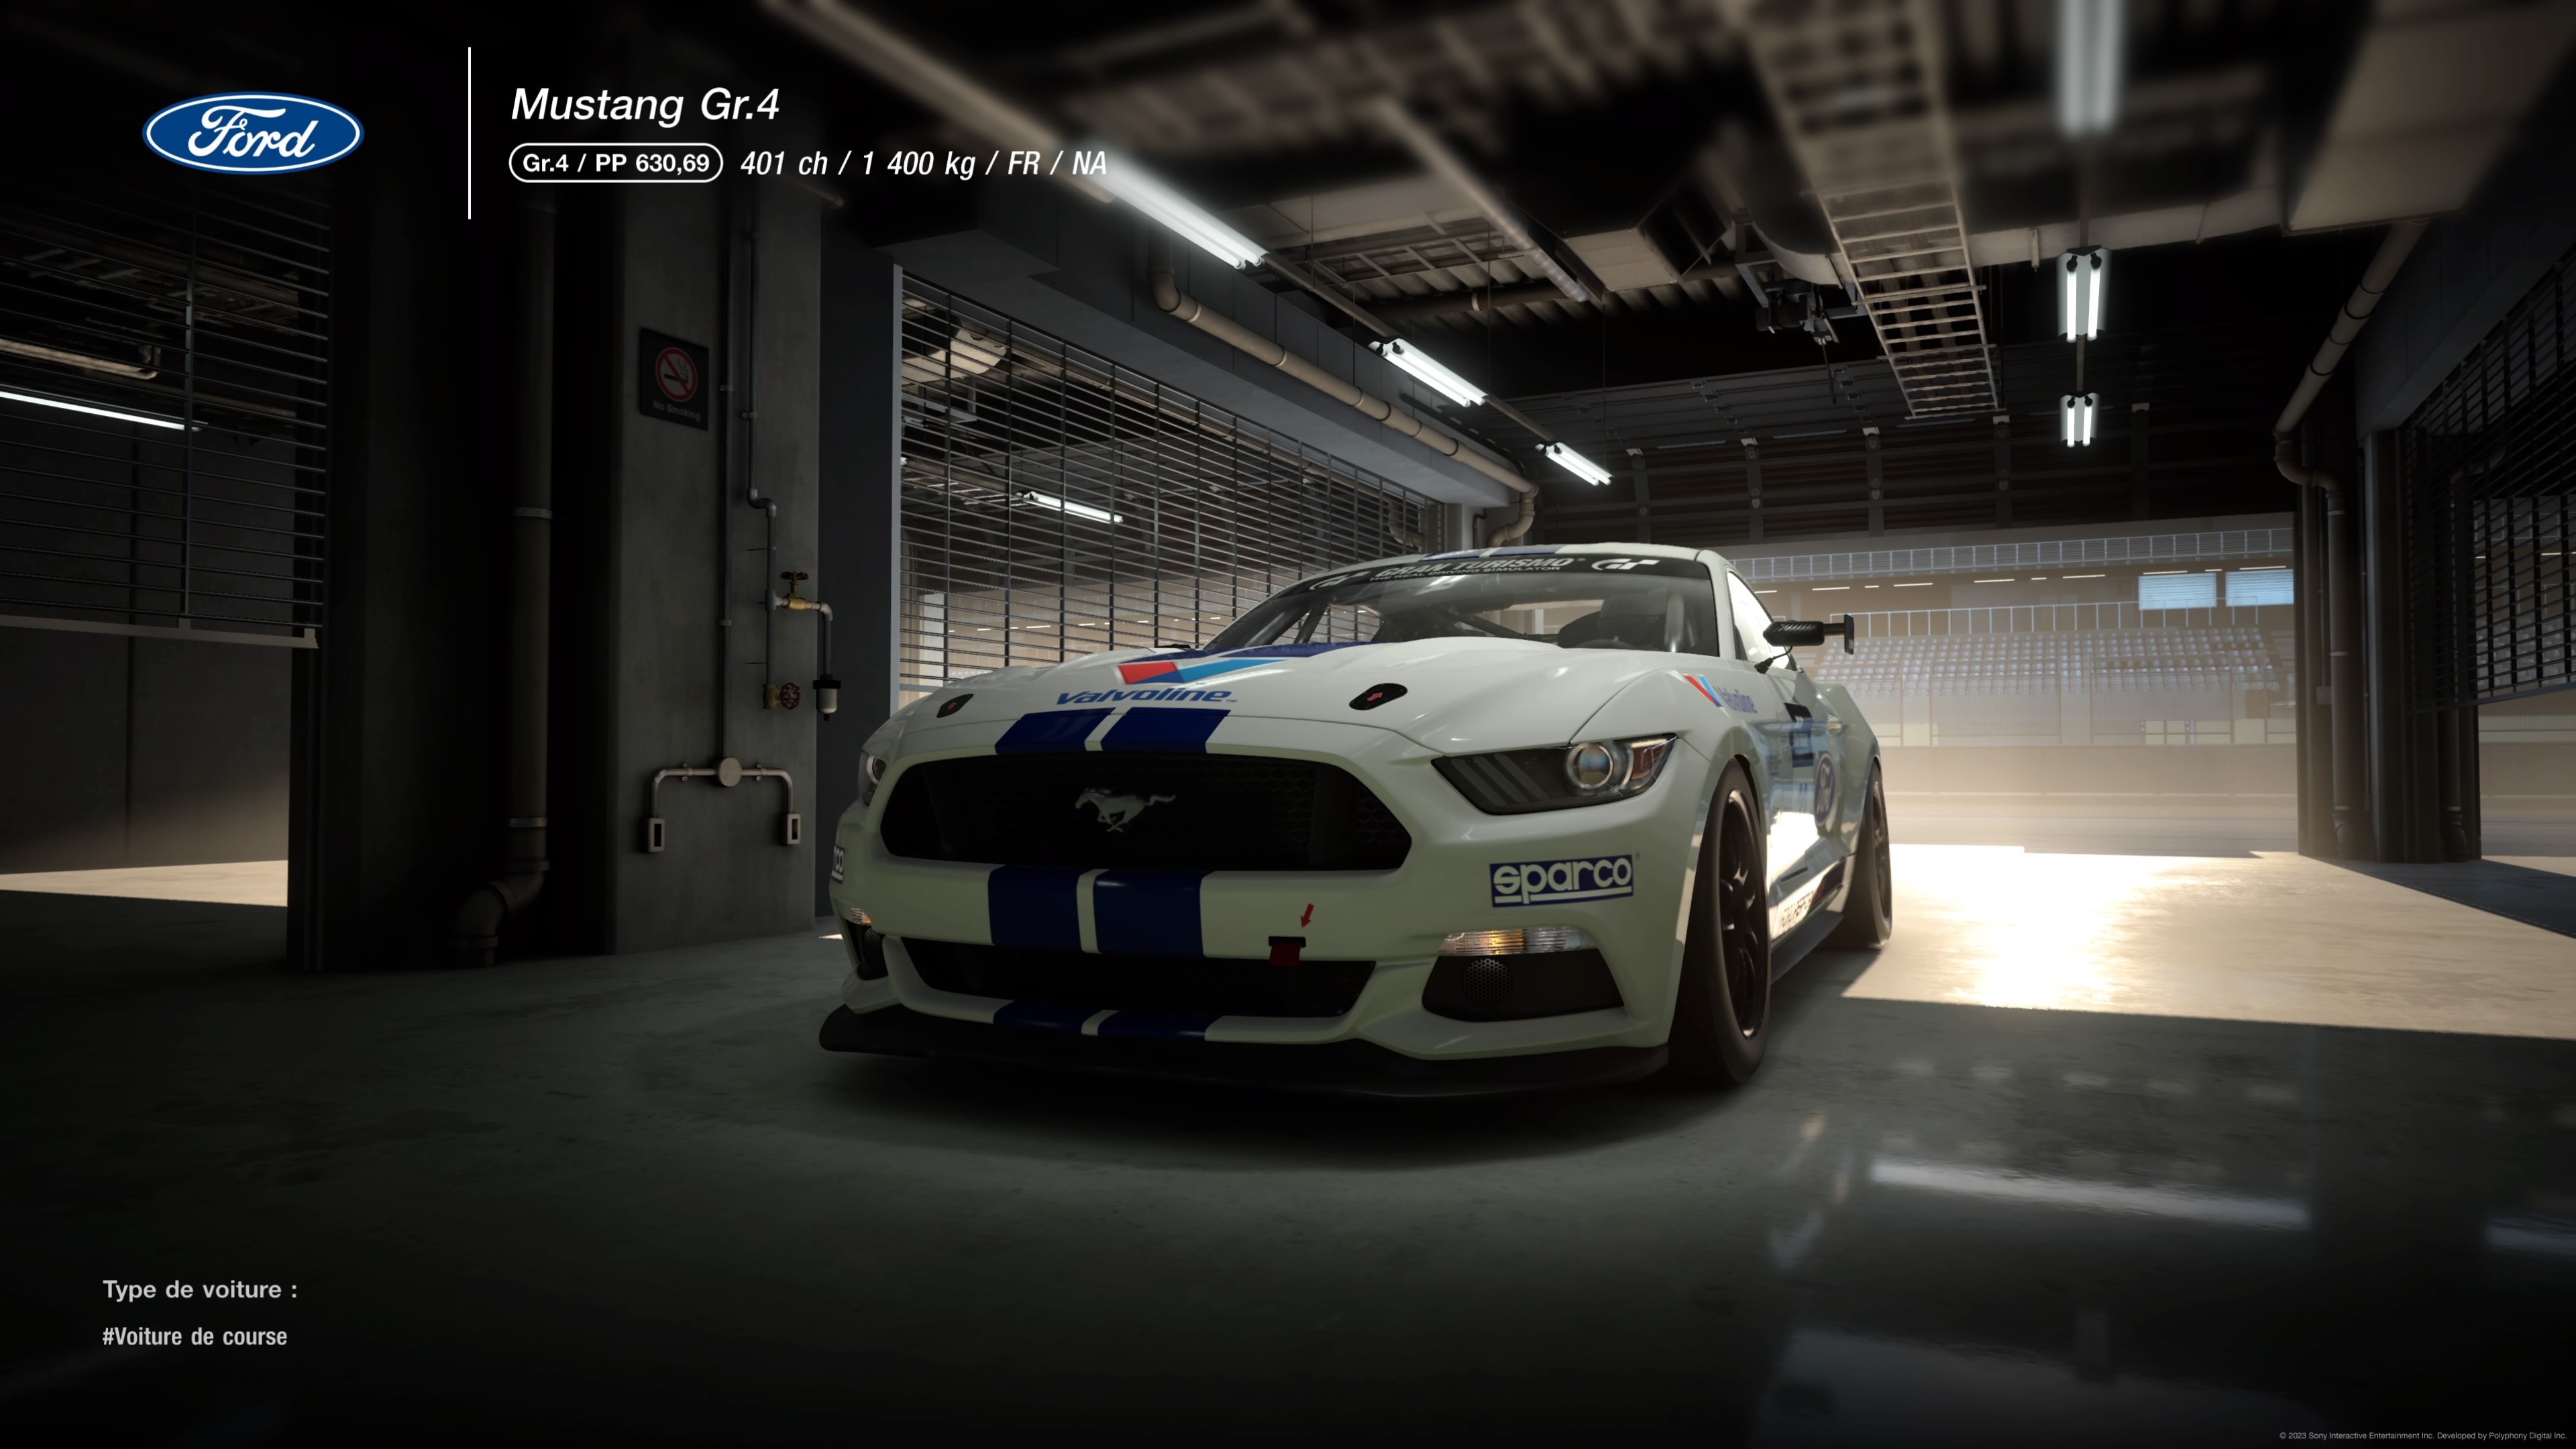 Gran Turismo 7 Car Collection by WitchWandaMaximoff on DeviantArt